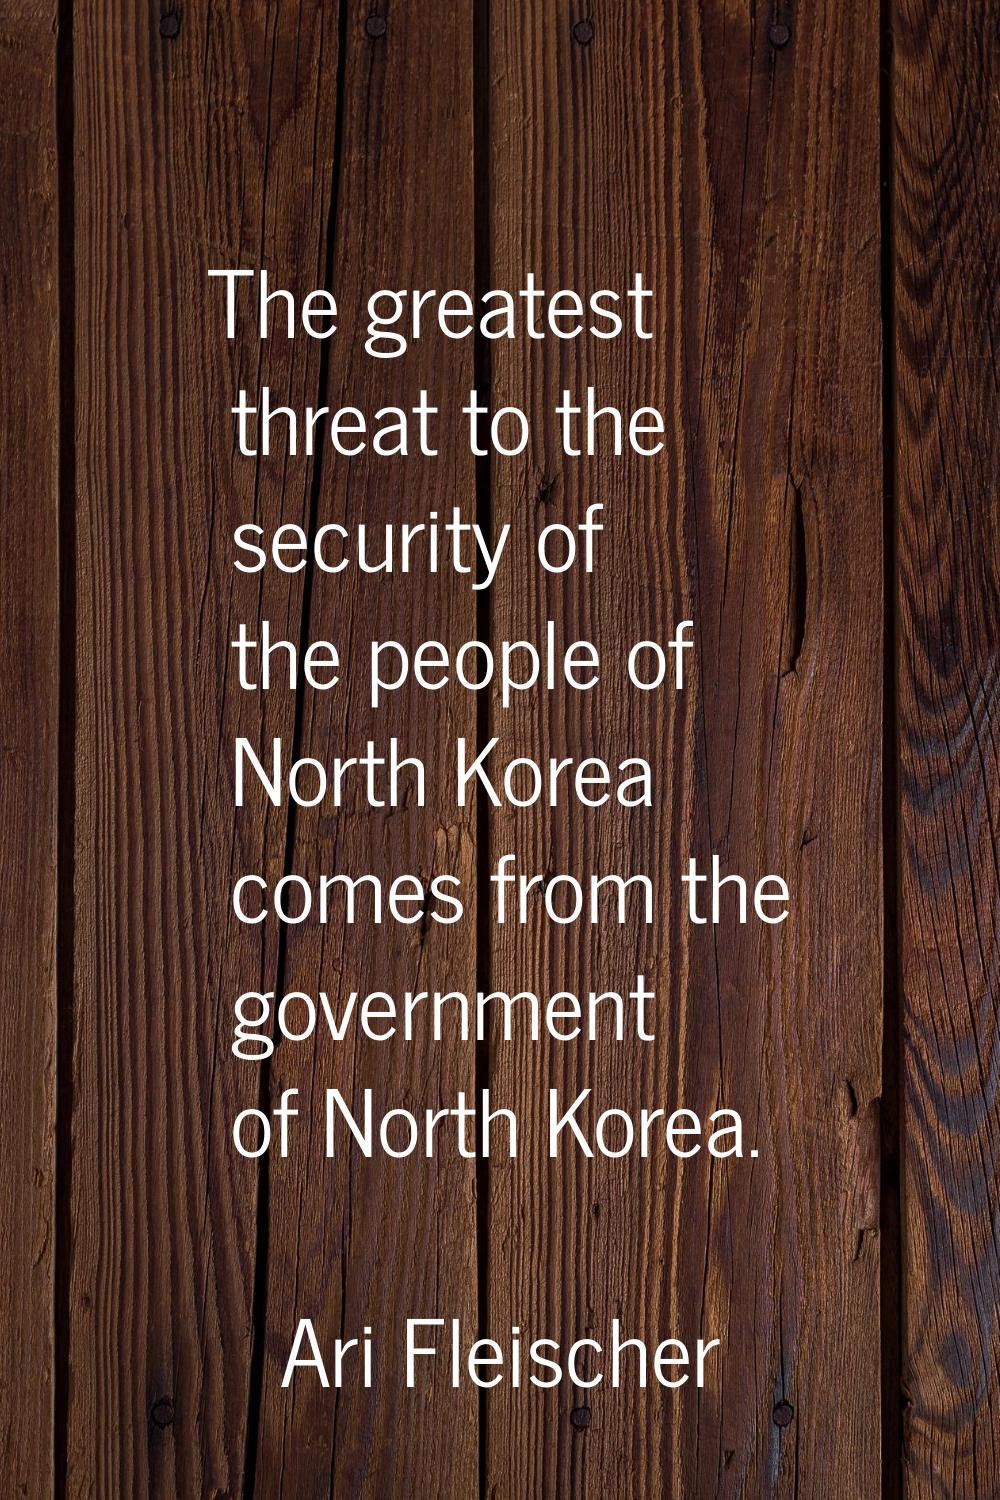 The greatest threat to the security of the people of North Korea comes from the government of North